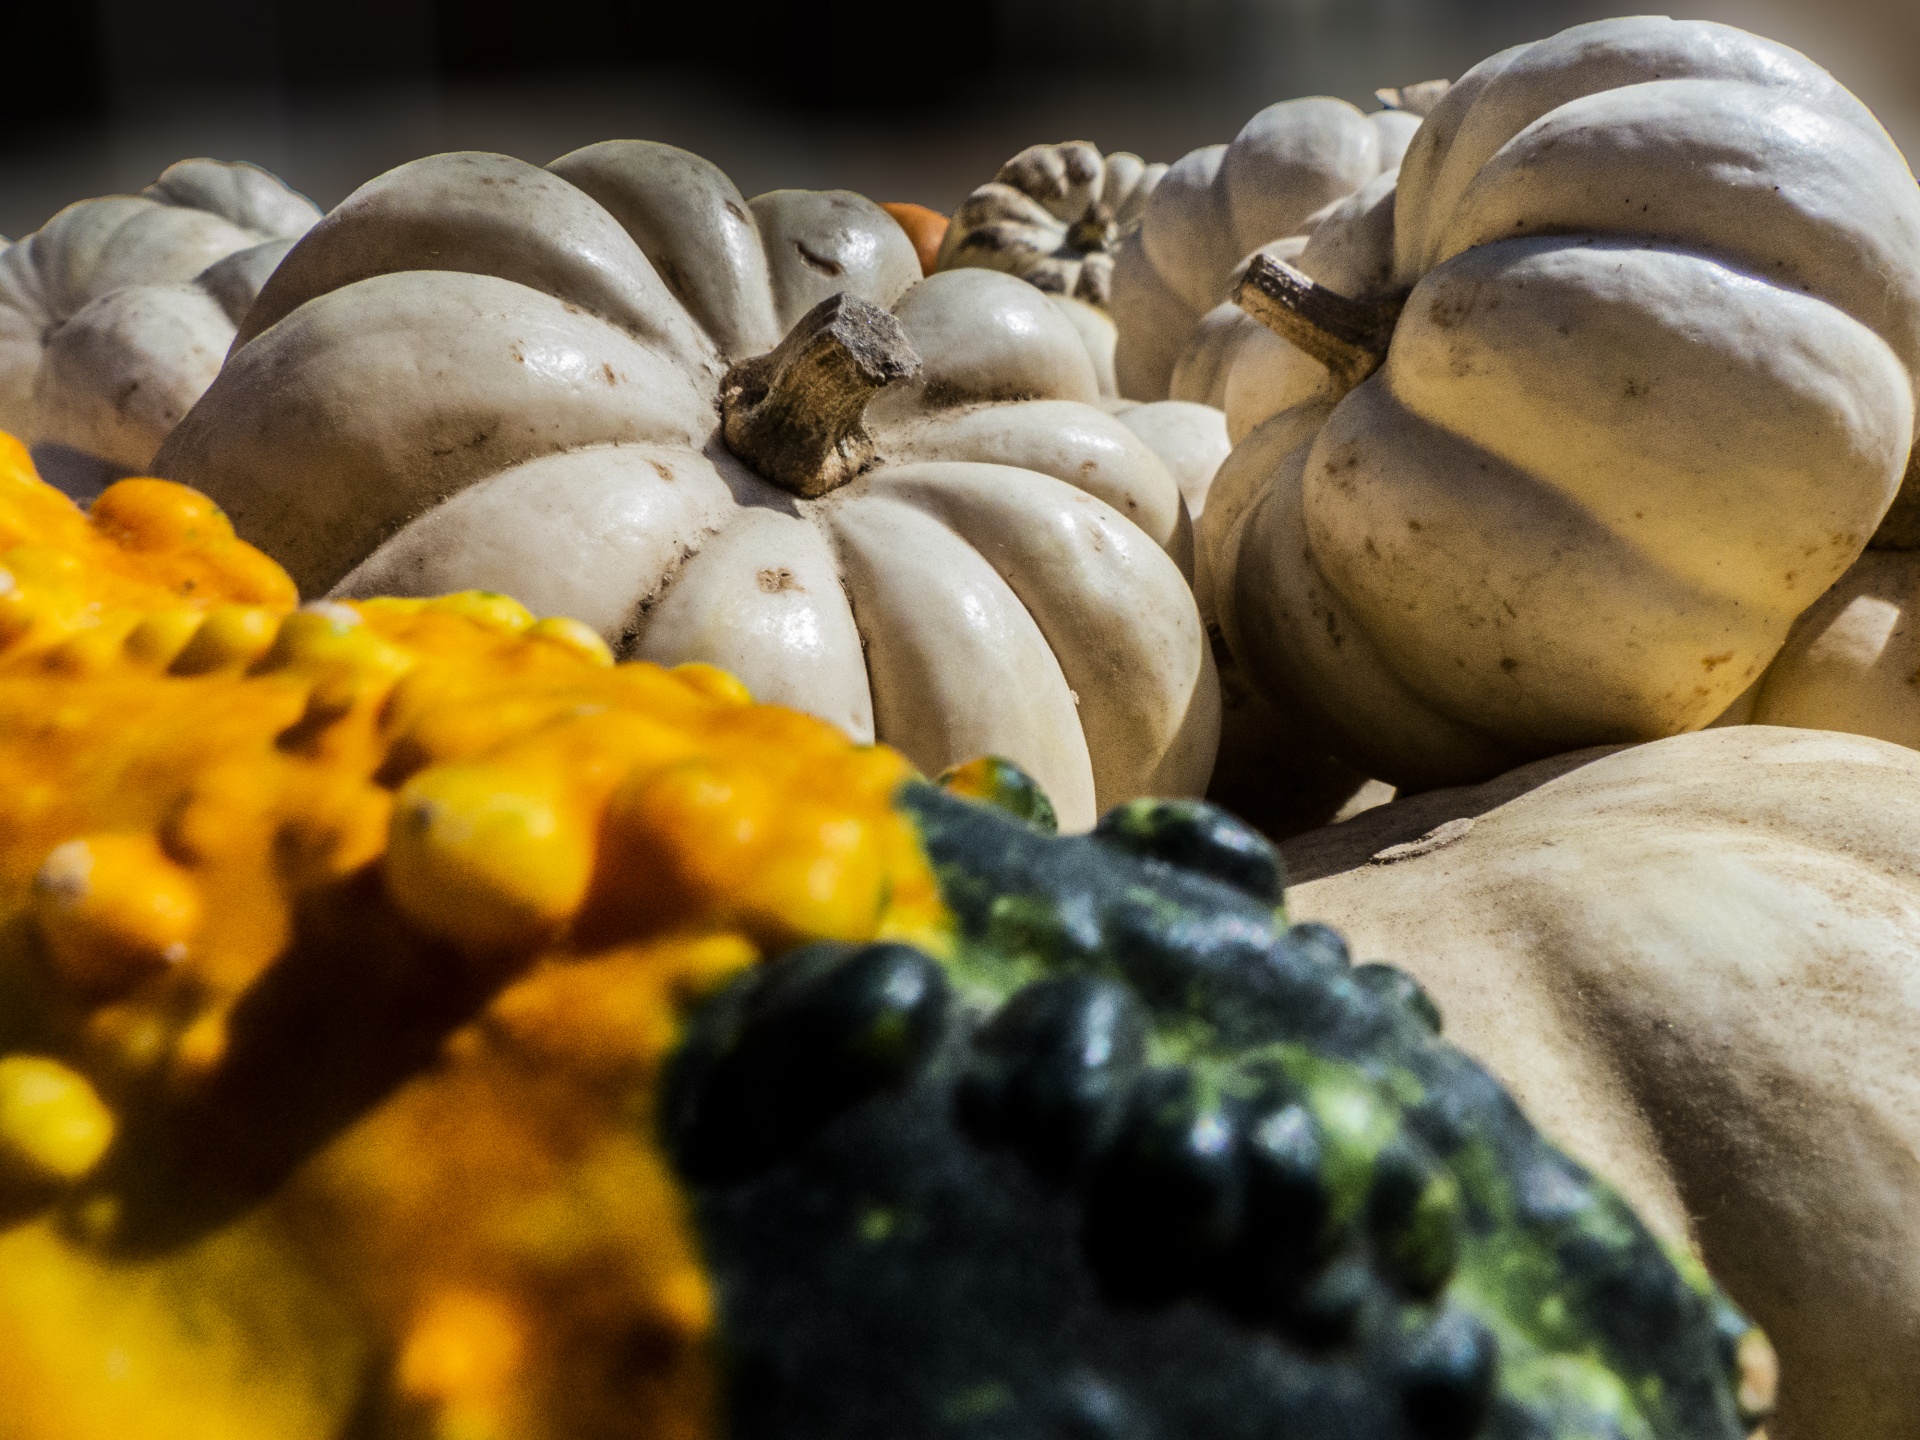 White pumpkins in market for sale, piled with other Fall foods, colorful gourds